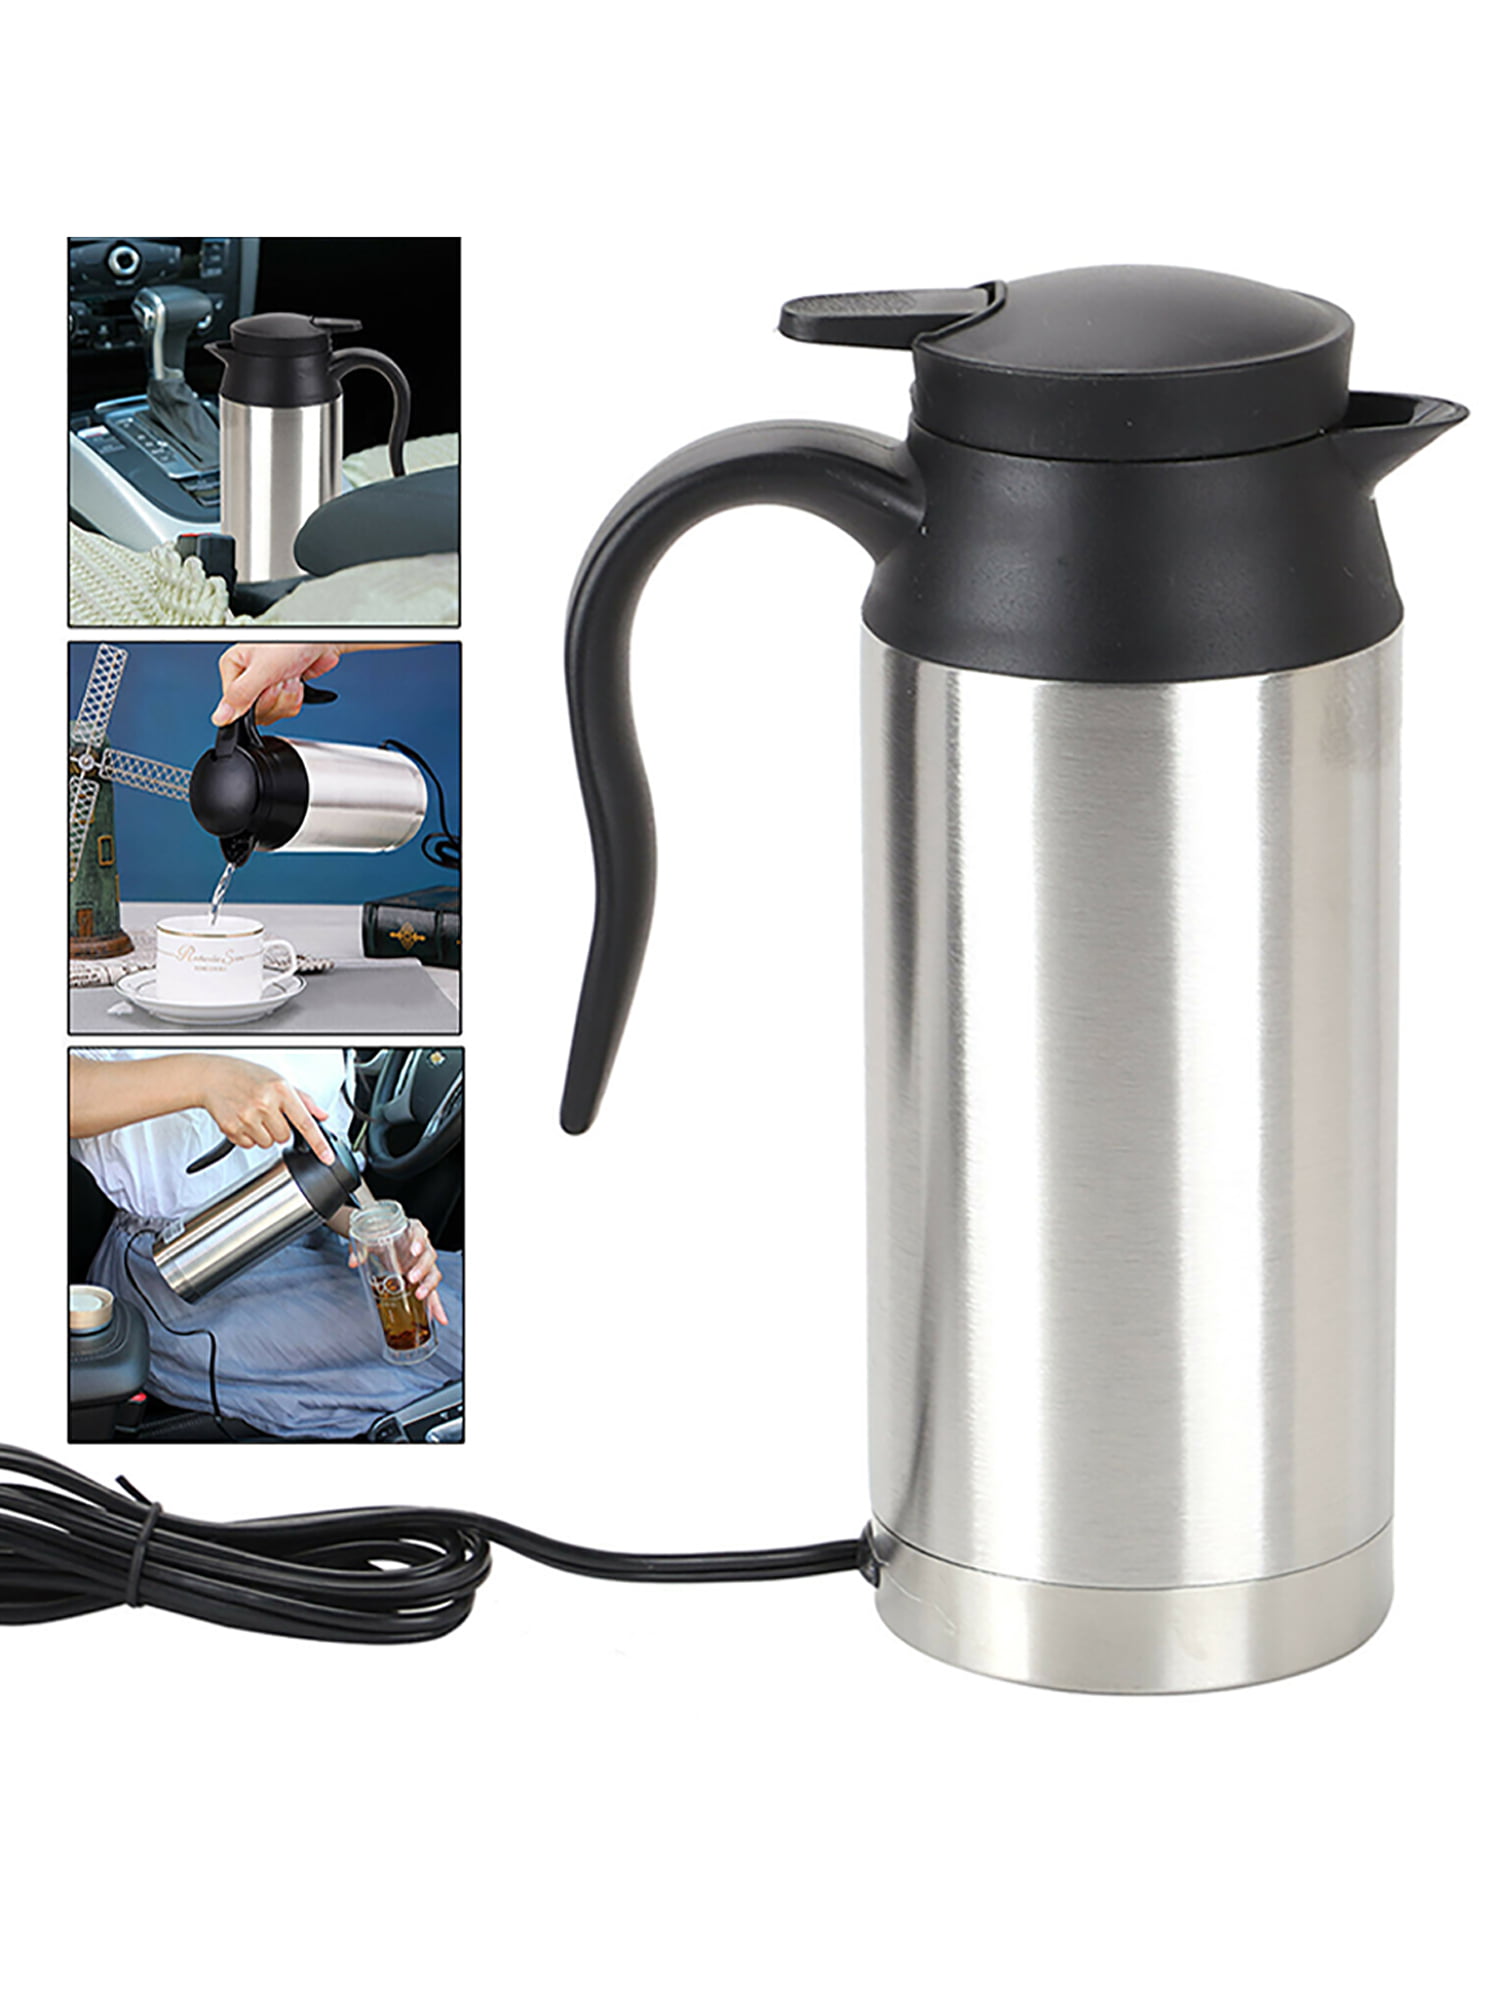 REMOVEABLLE ELECTRIC WIRE CAR HEATED NEW 12V STAINLESS STEEL ELECTRIC MUG KETTLE JUG 